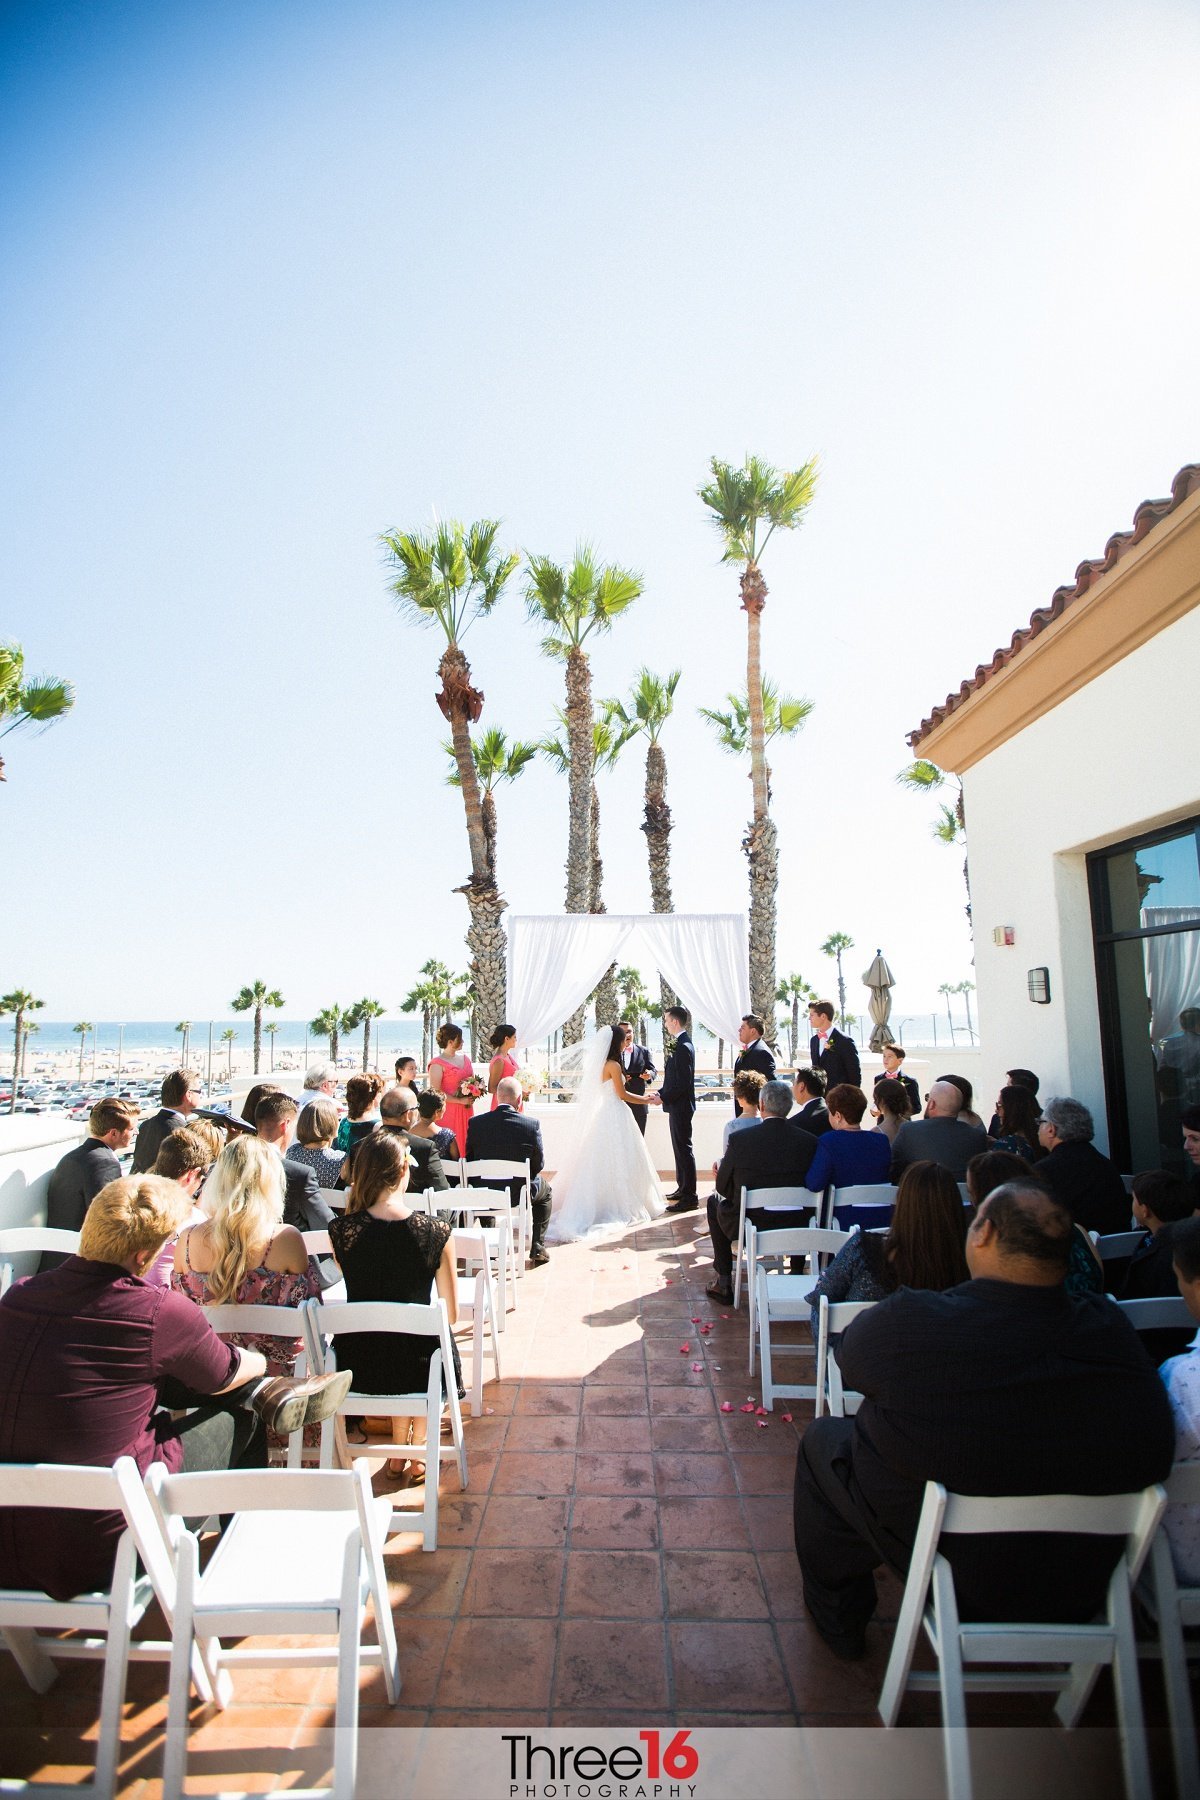 A Hilton Waterfront Beach Resort Wedding Ceremony in action